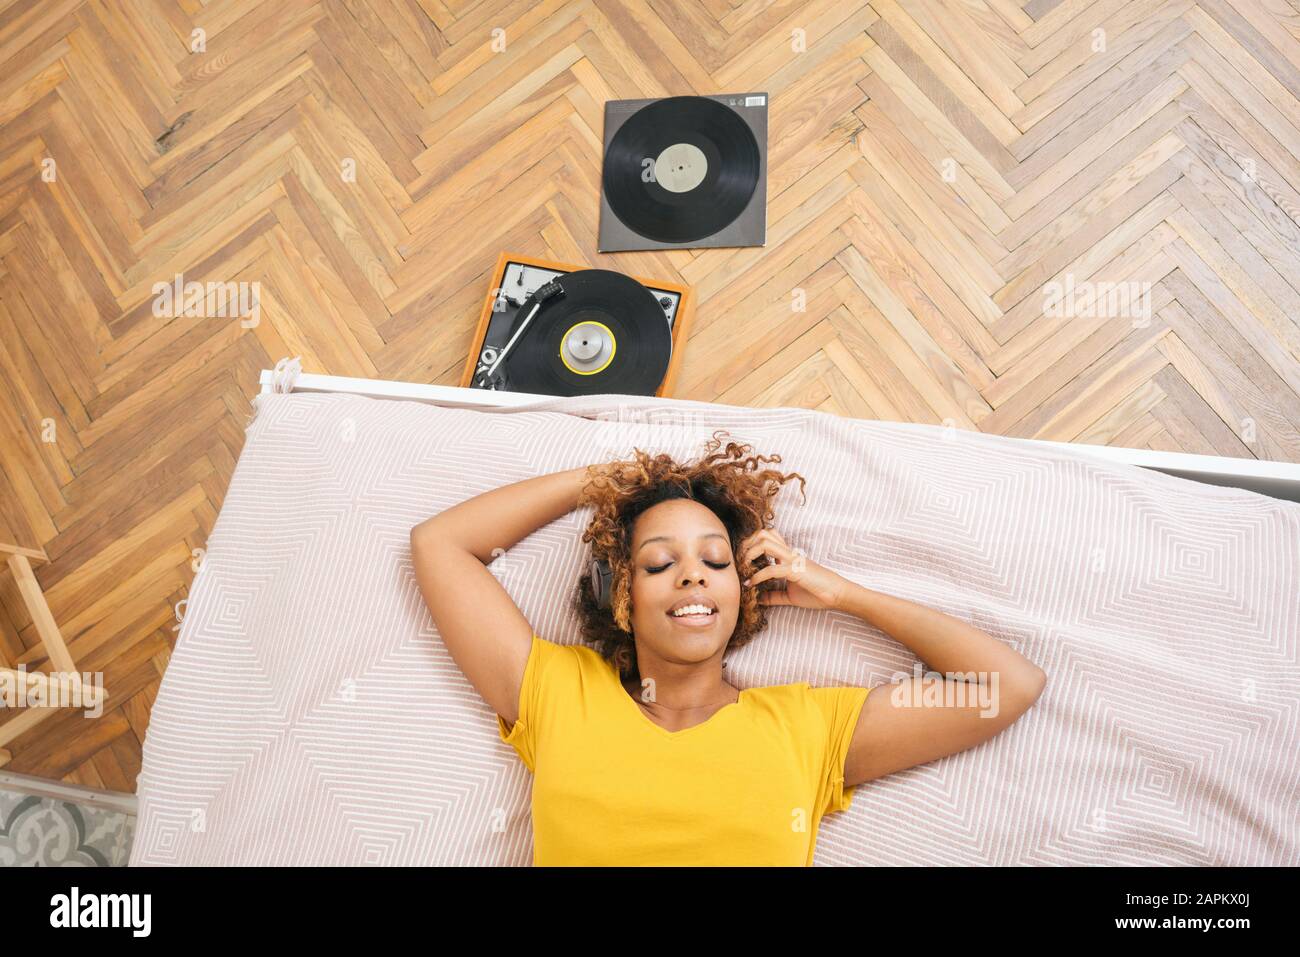 Young woman lying on bed listening to music with headphones and record player Stock Photo